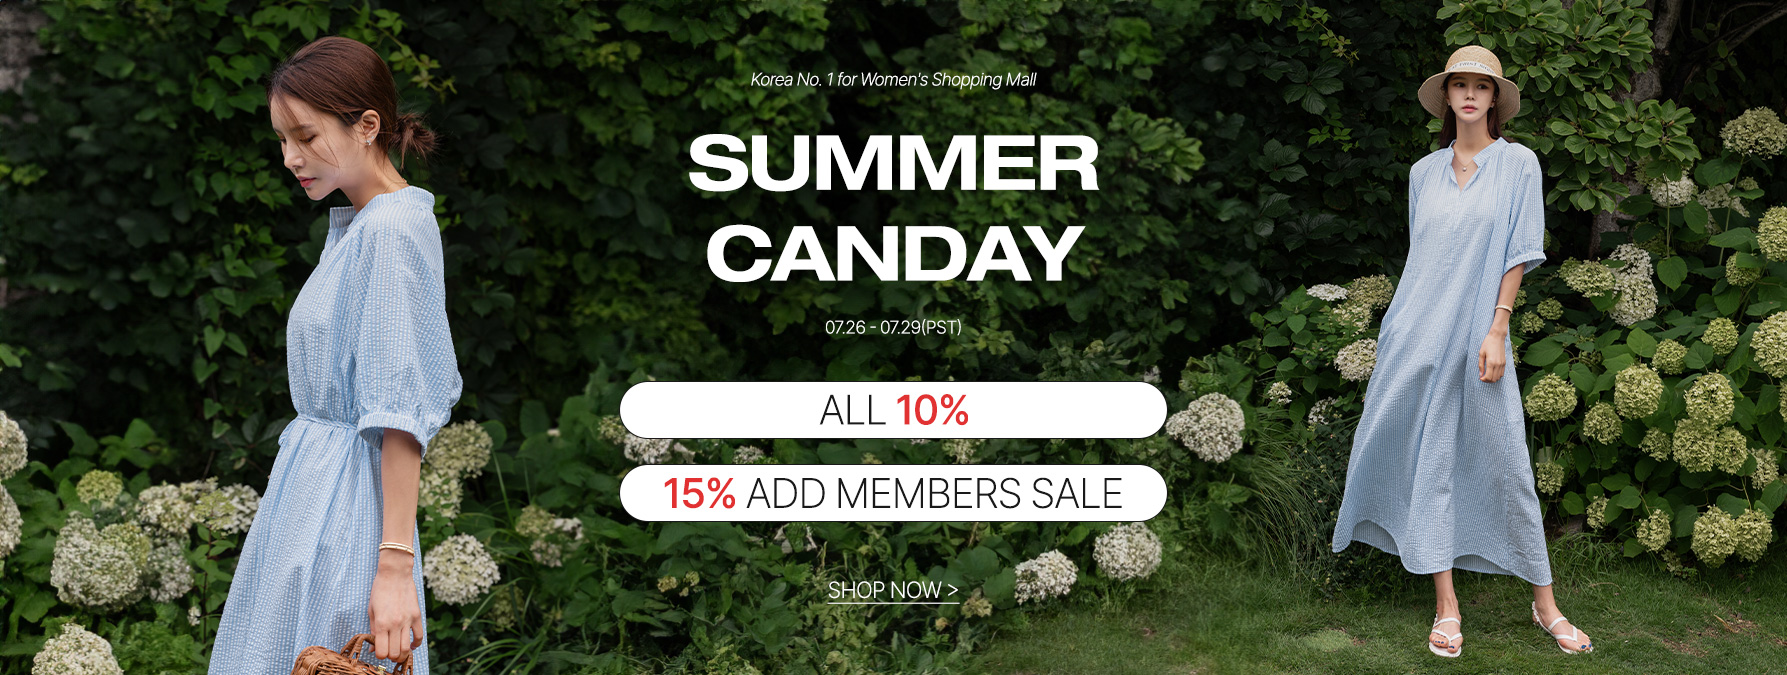 main1(ALL 10% and 15% add members sale)